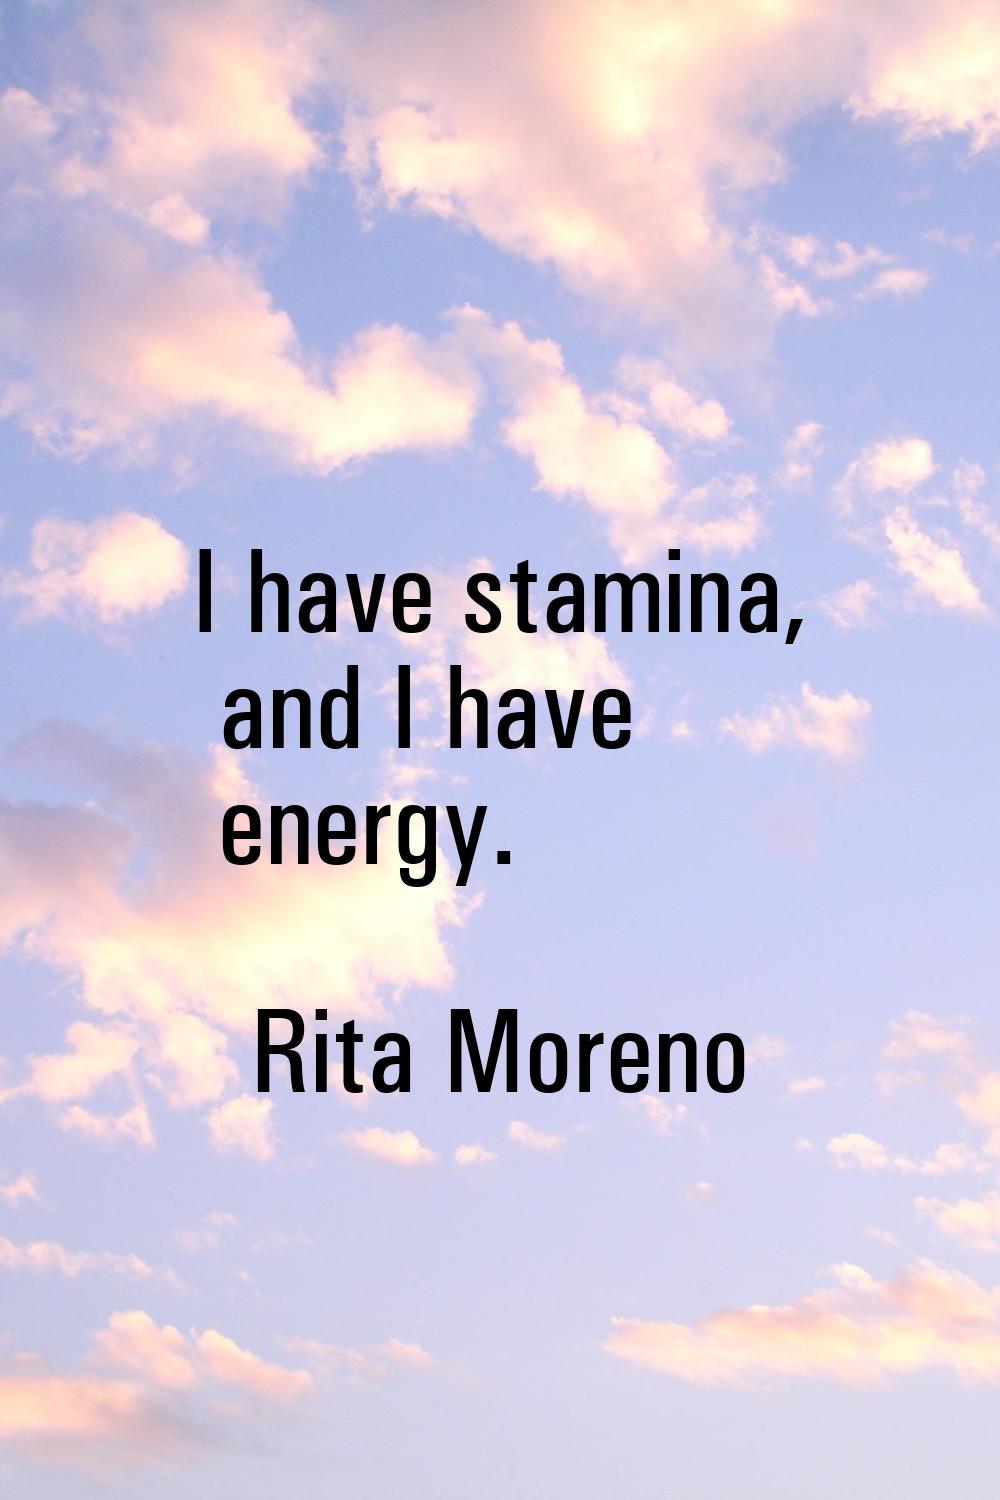 I have stamina, and I have energy.